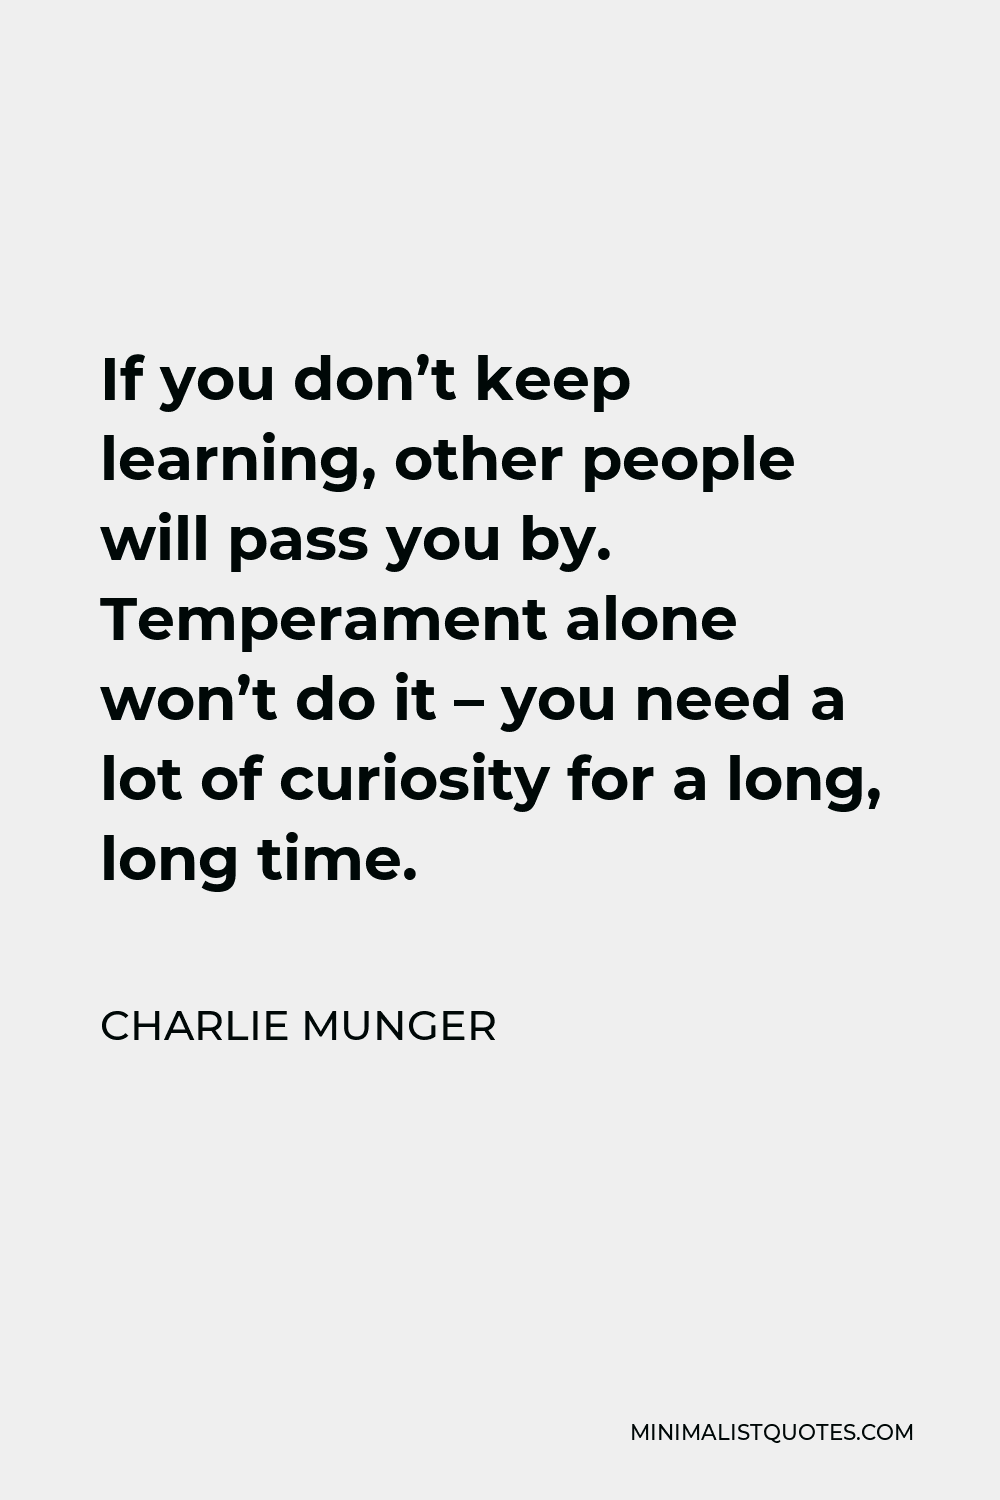 Charlie Munger Quote - If you don’t keep learning, other people will pass you by. Temperament alone won’t do it – you need a lot of curiosity for a long, long time.